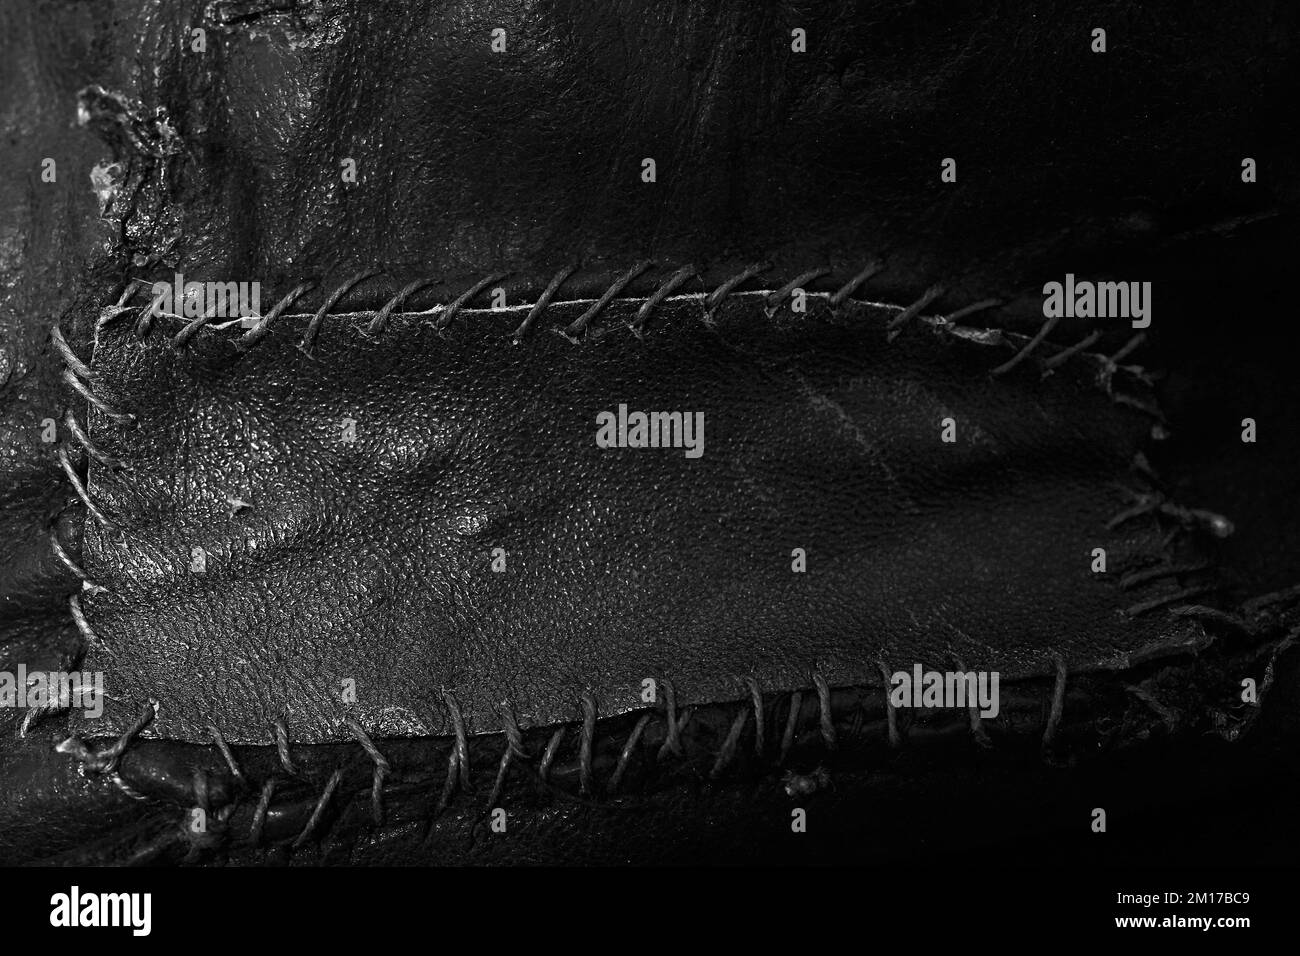 Close up of leather being stitched and patched Stock Photo